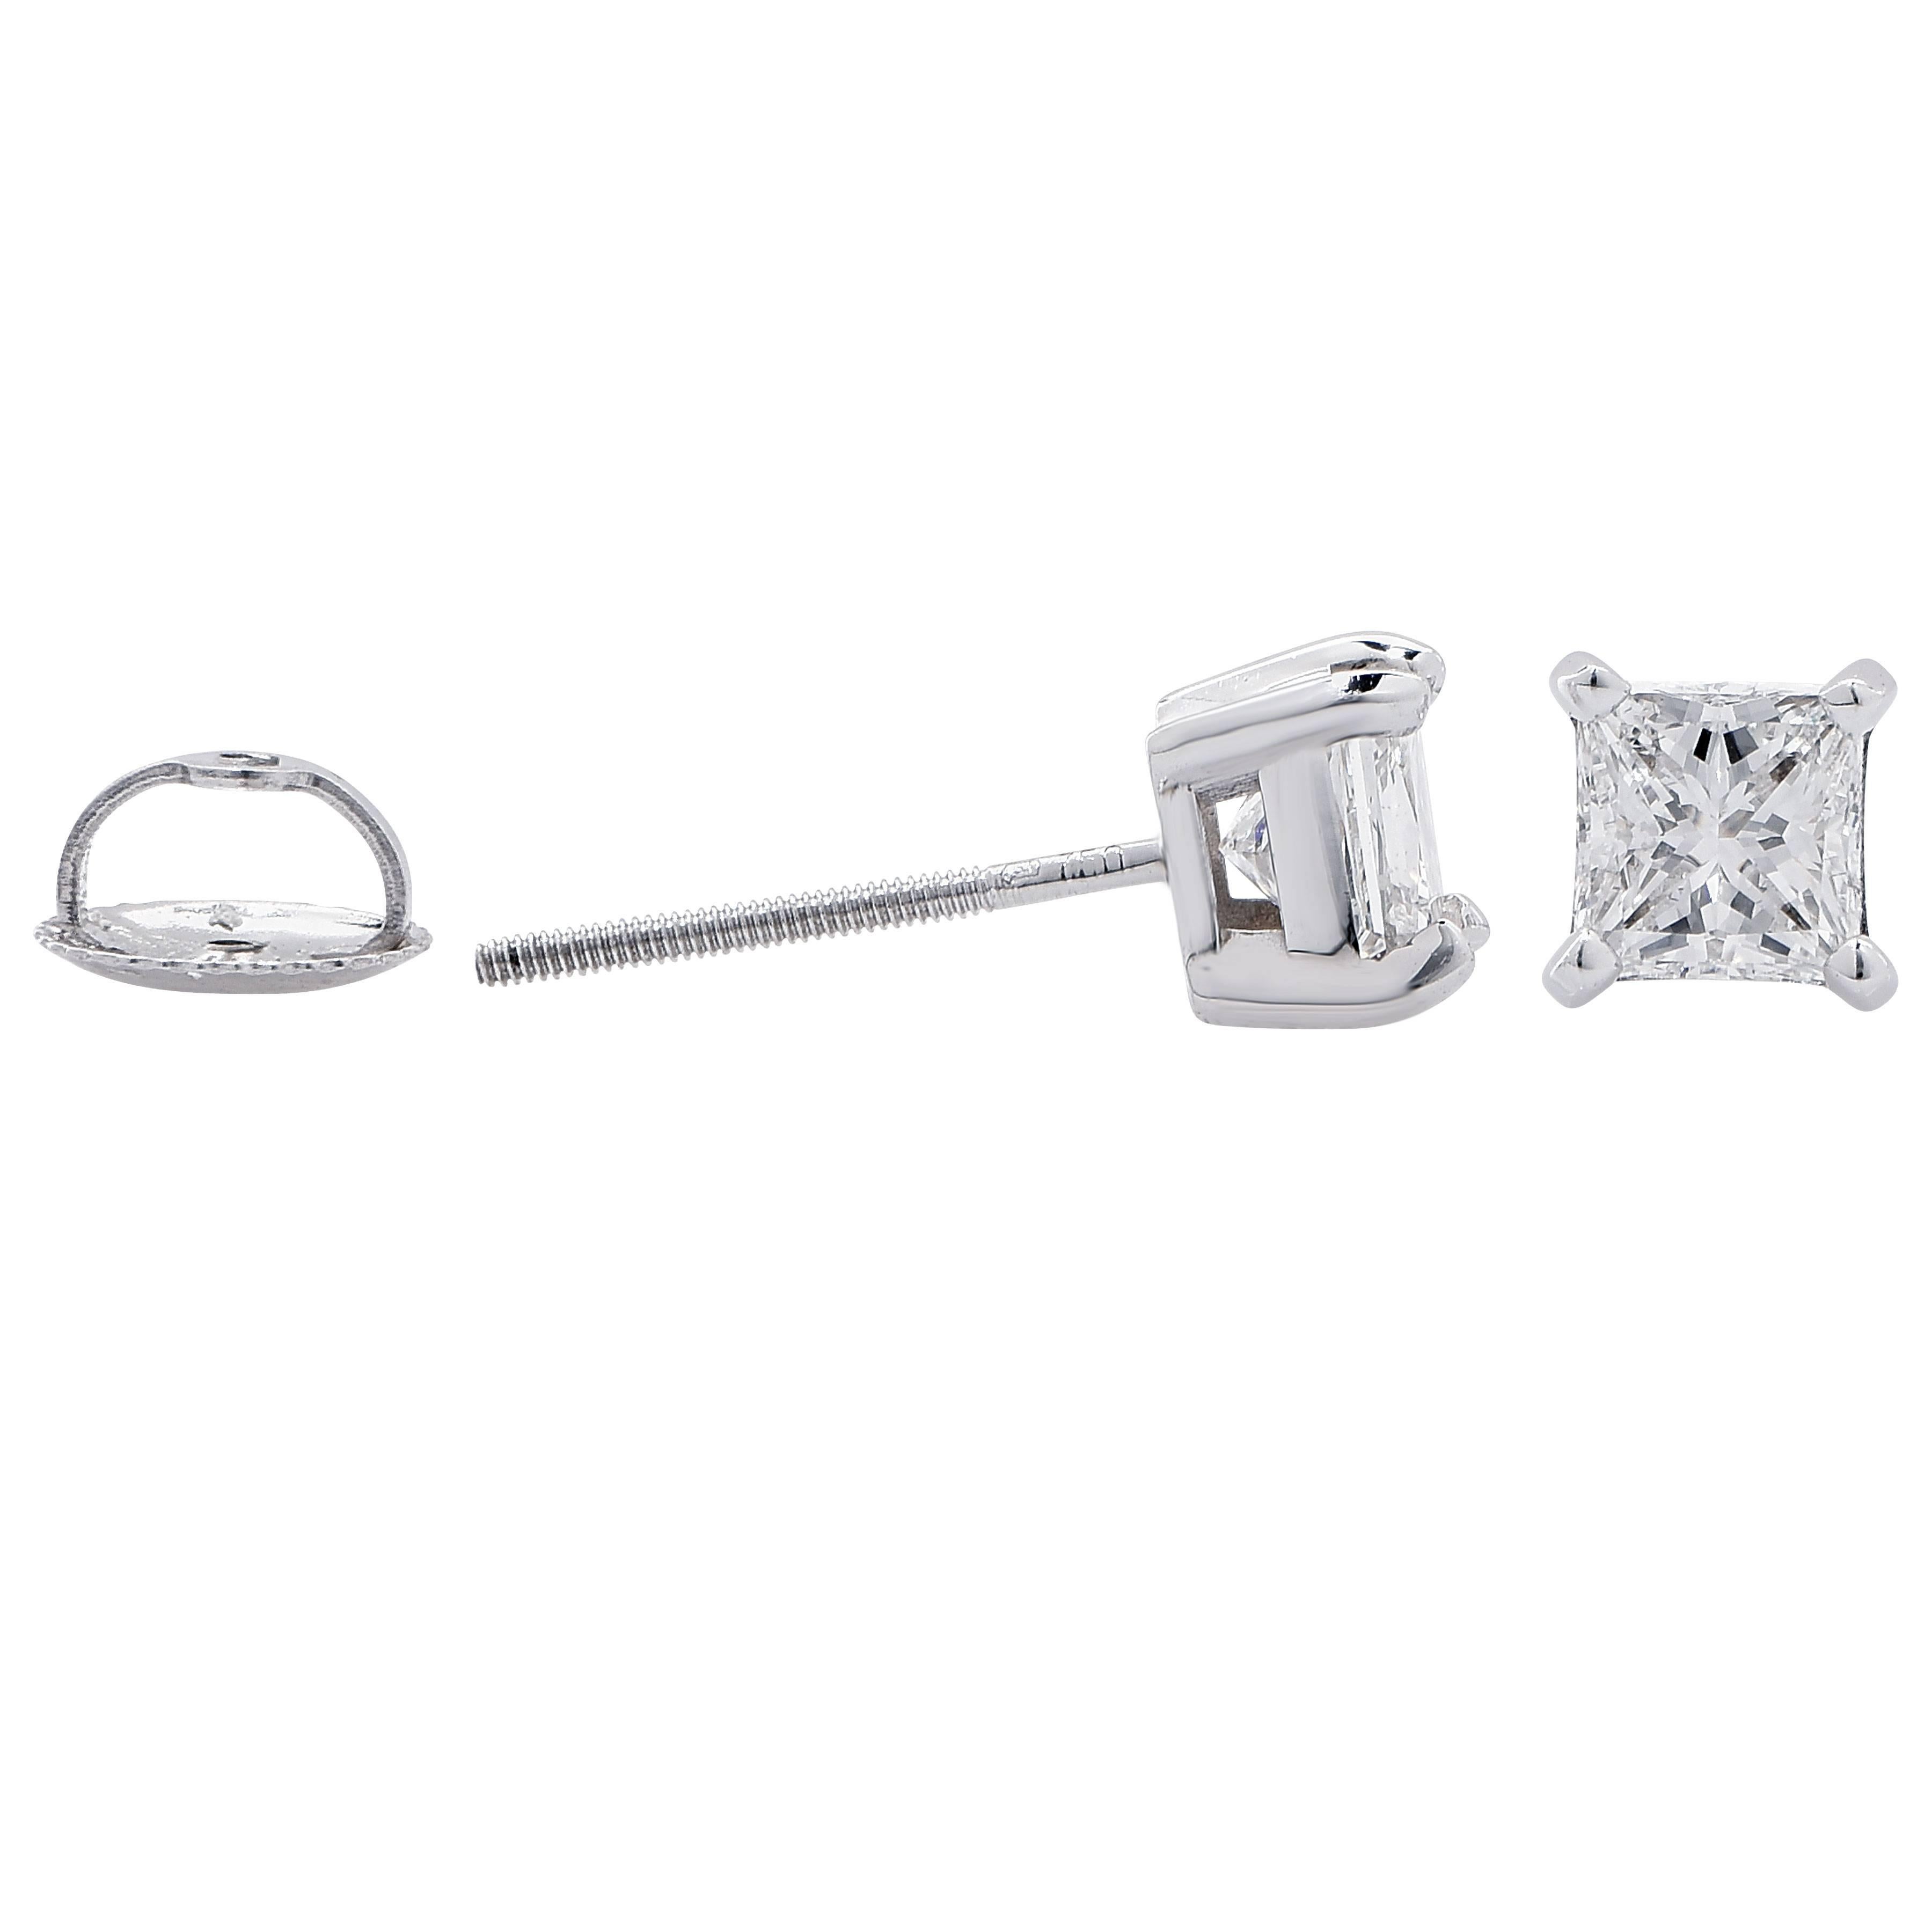 Modern 1.17 Carat Total weight Princess Cut Earrings E Color, VS1 Clarity set in 18 Karat White Gold.

Metal Type: 18 Kt White Gold (tested and/or stamped)
Metal Weight: 1.5 Grams